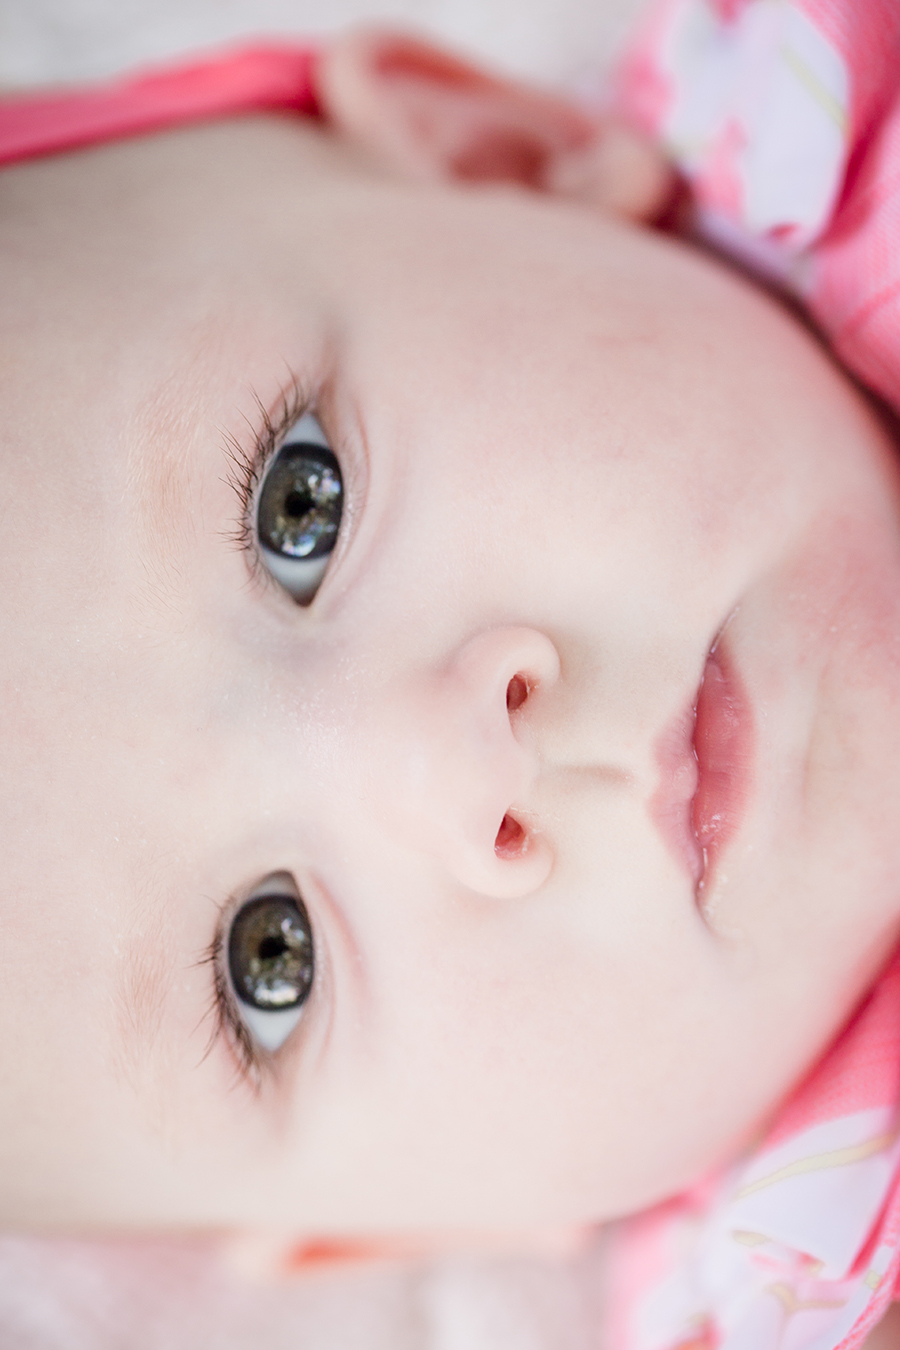 Close up of baby's face by Knoxville Wedding Photographer, Amanda May Photos.